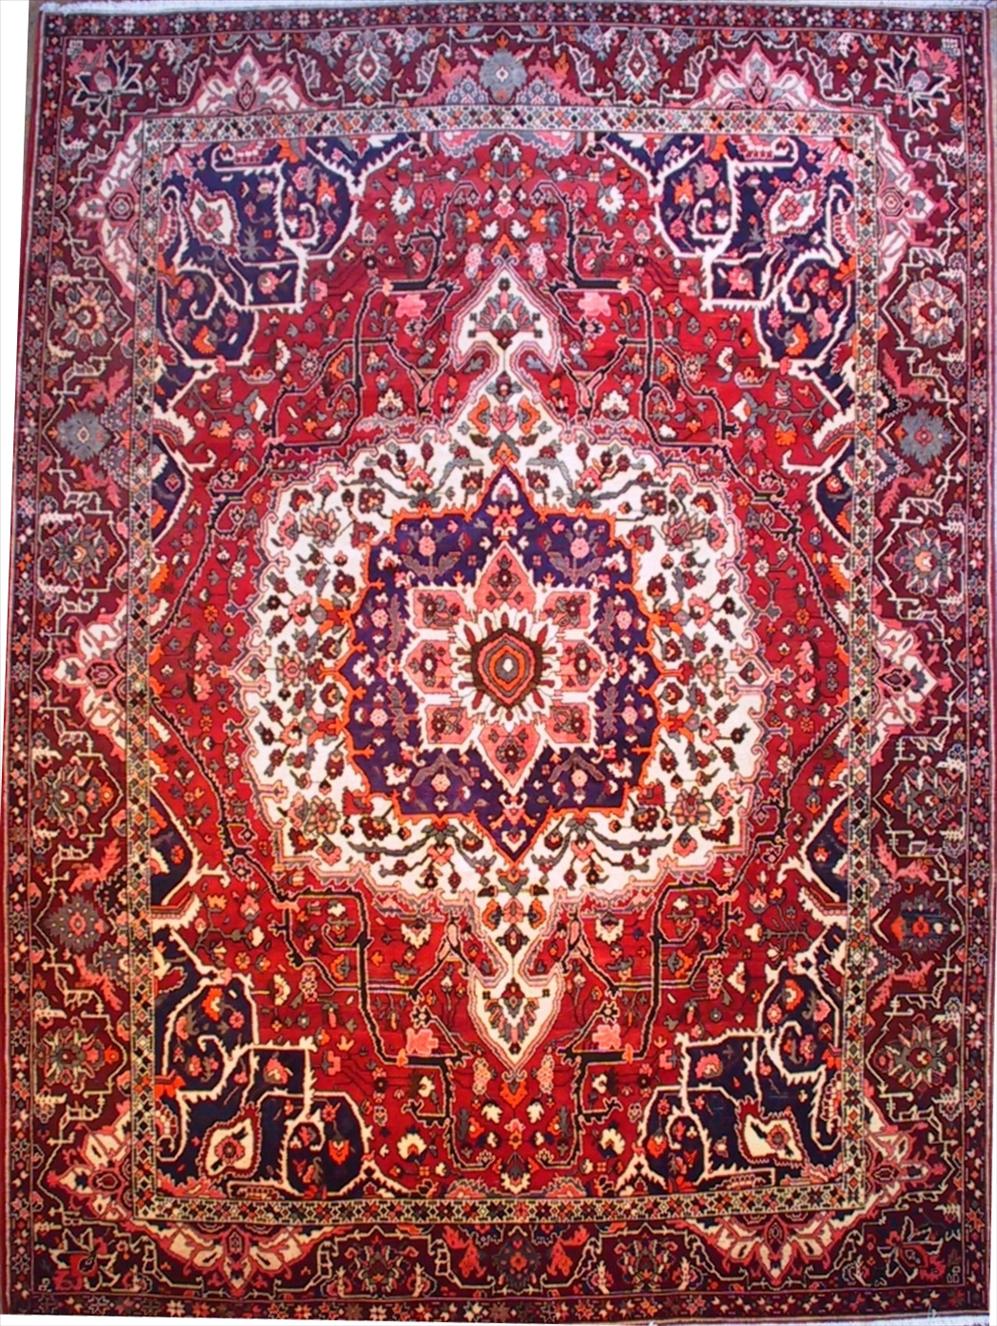 Amazing 684 Bakhtiari rugs - This Traditional rug is approx imately 10 feet 1 red persian rug